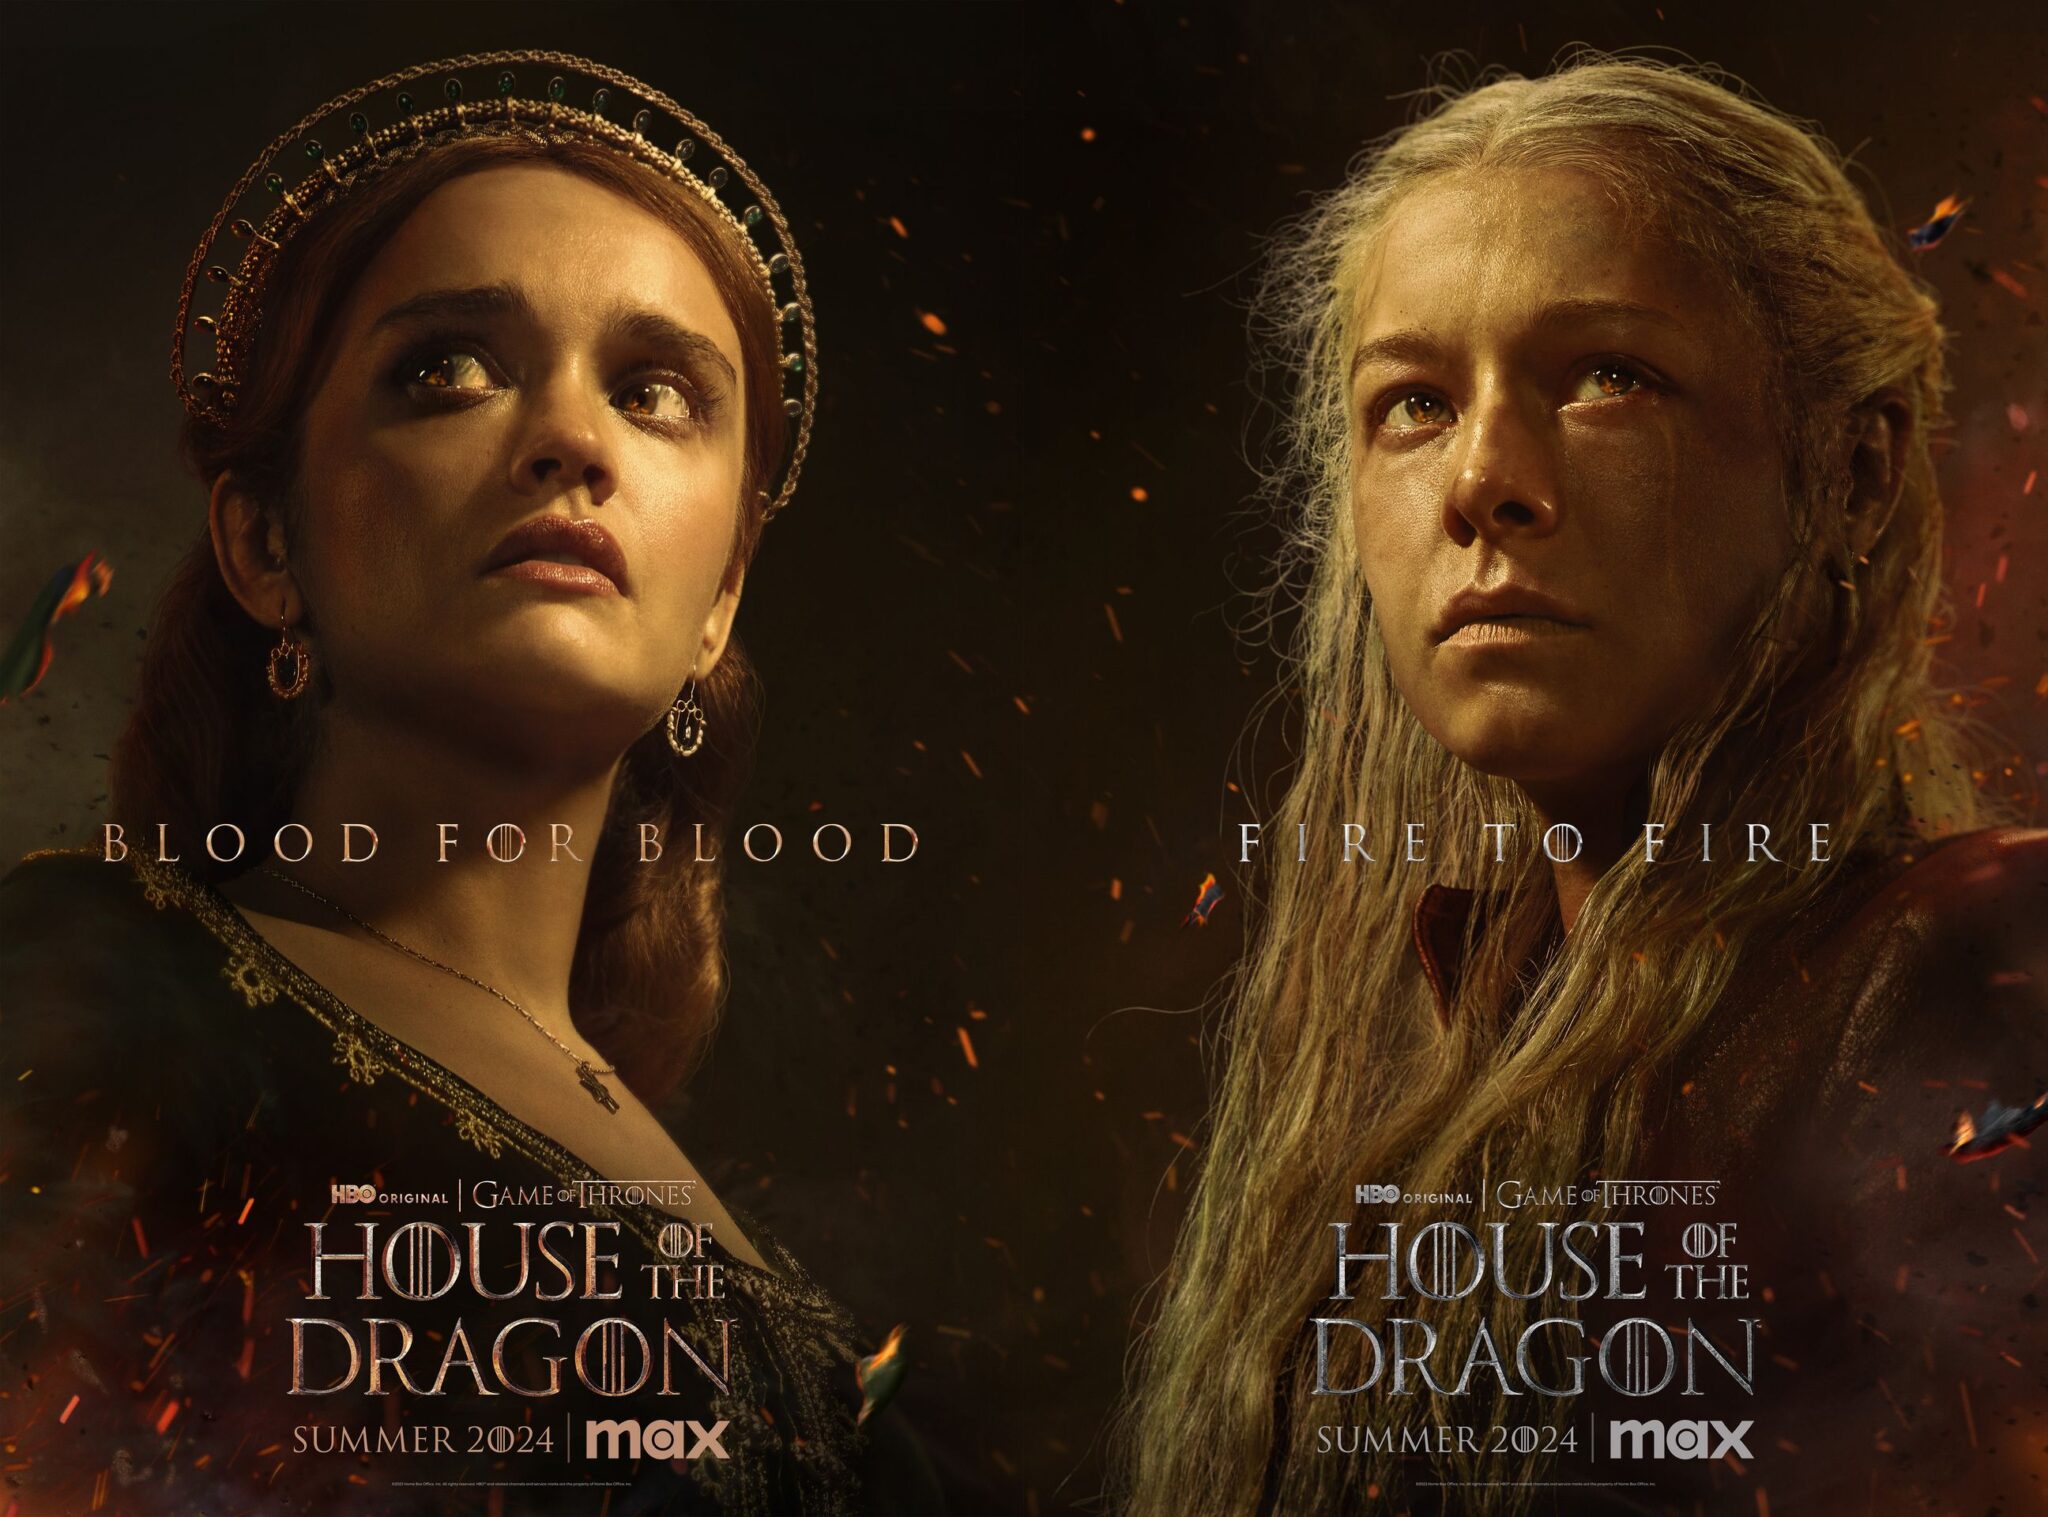 ‘House of the Dragon’ Posters Tease Rhaenyra & Alicent’s Season 2